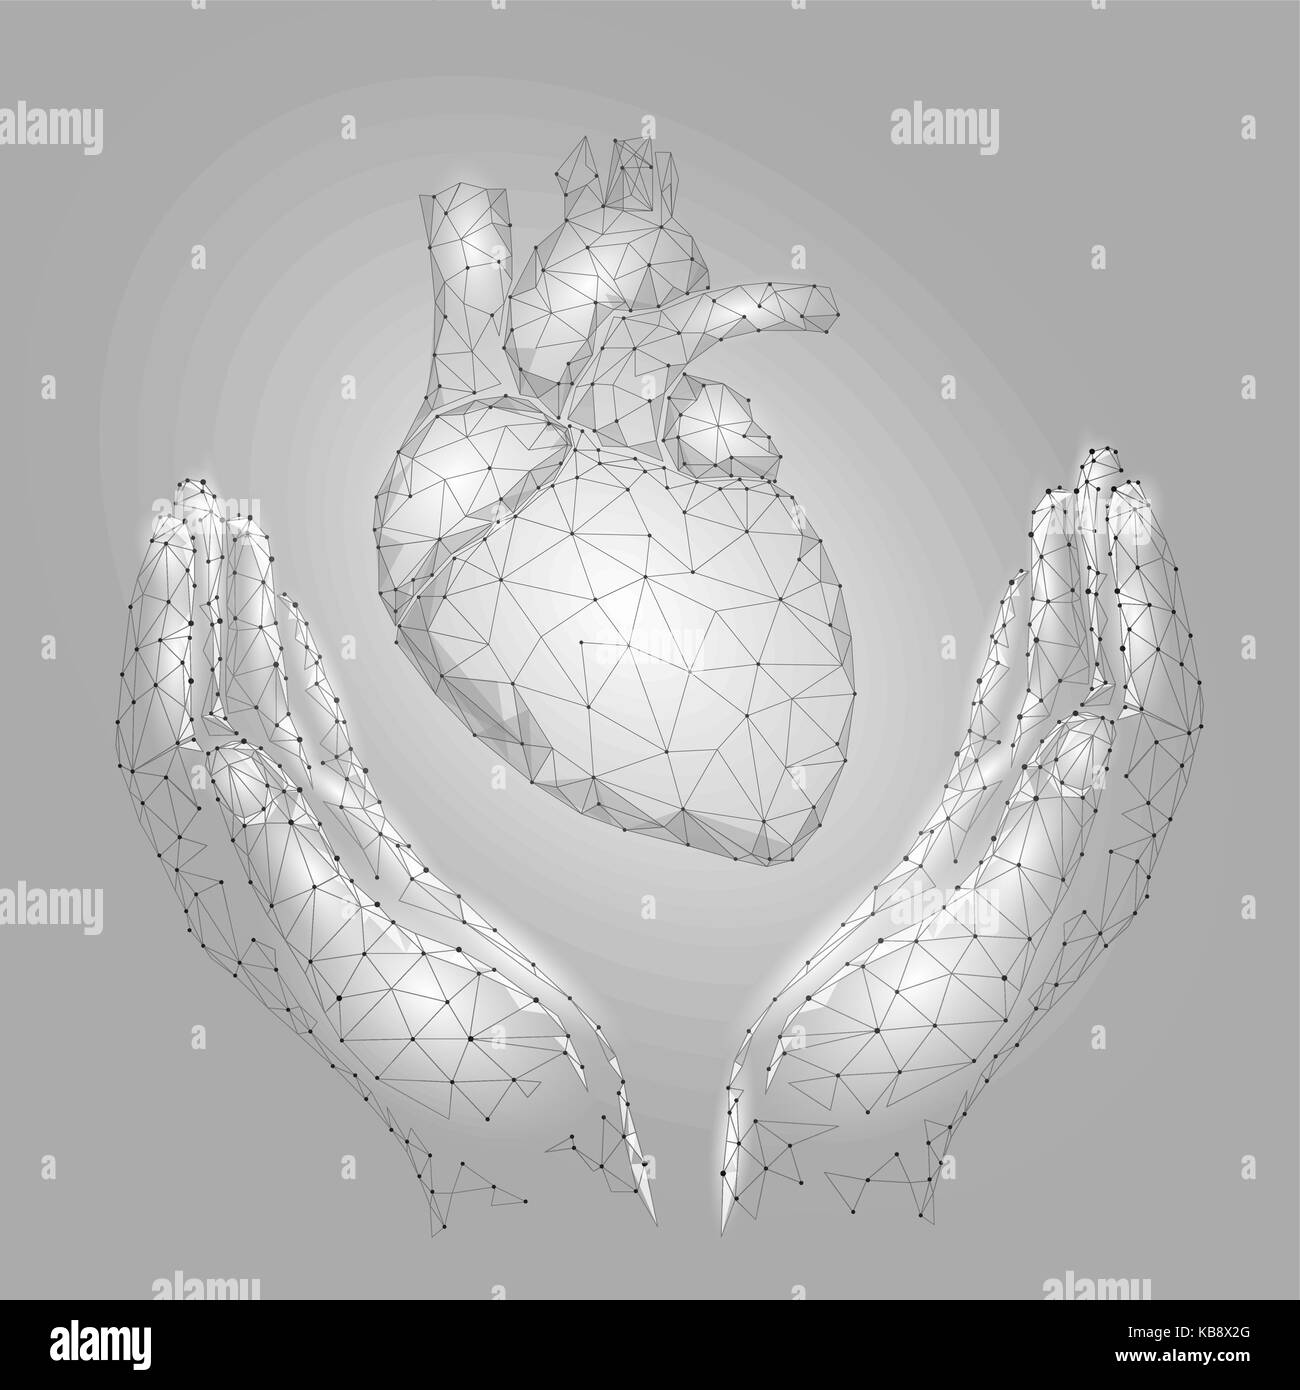 Hands holding support human heart. Medicine cardiology health help man concept. Low poly gray white connected dots triangle future technology design background vector illustration Stock Vector